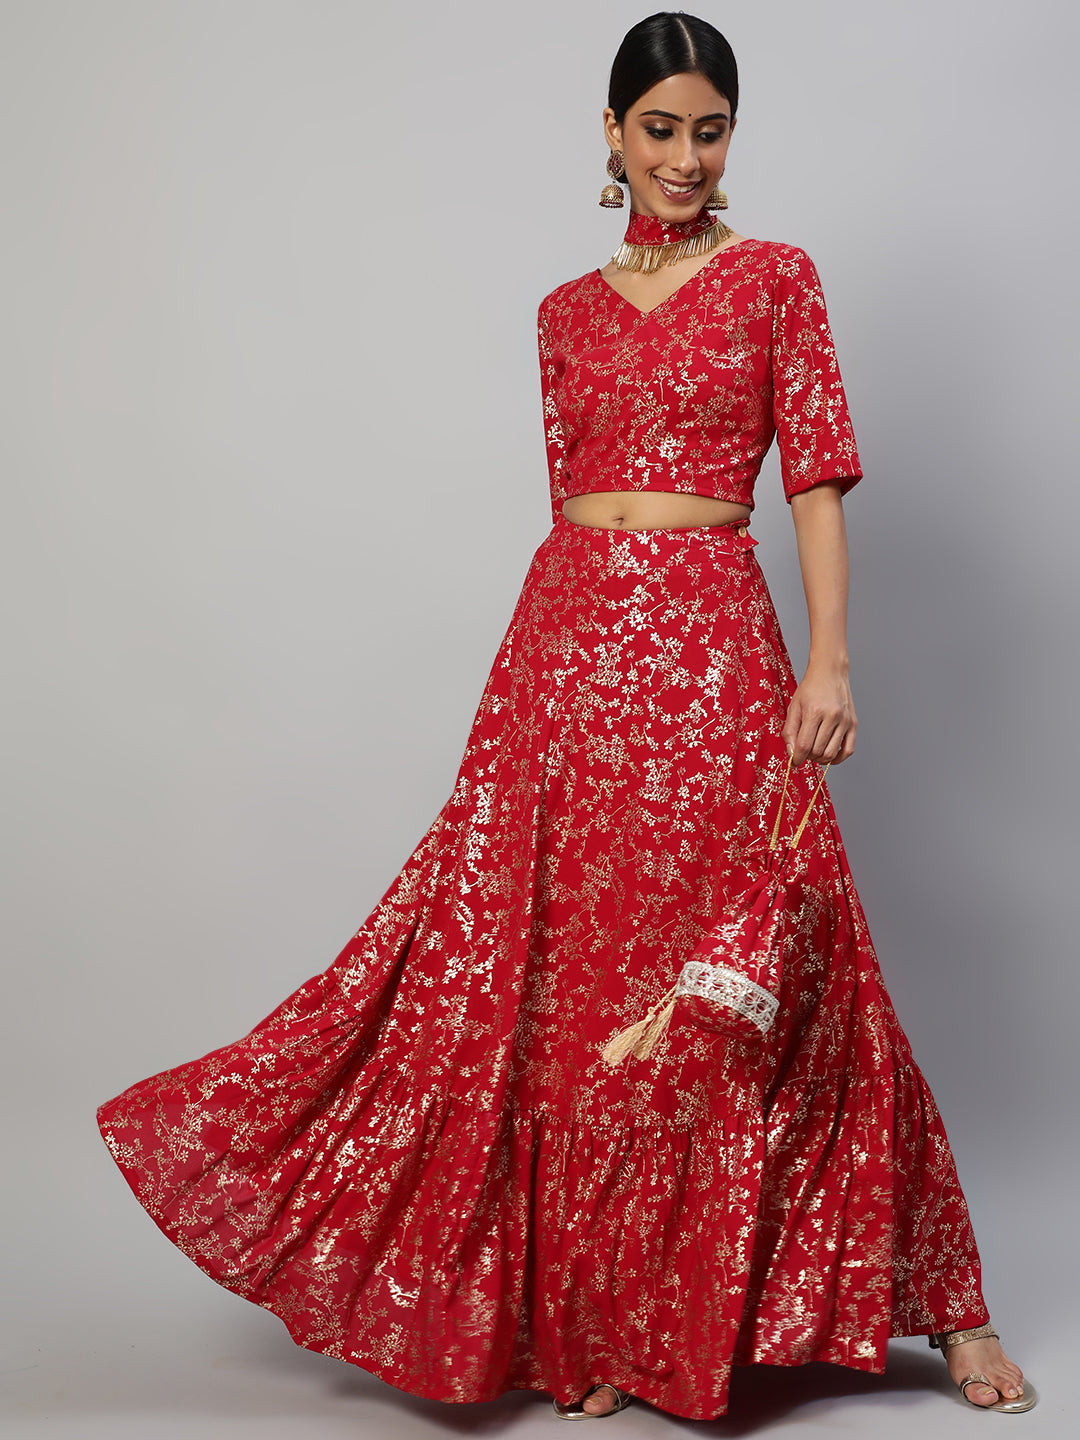 Women's Red Floral Printed Lehenga Choli With Potali Bag & Necklace - Aks